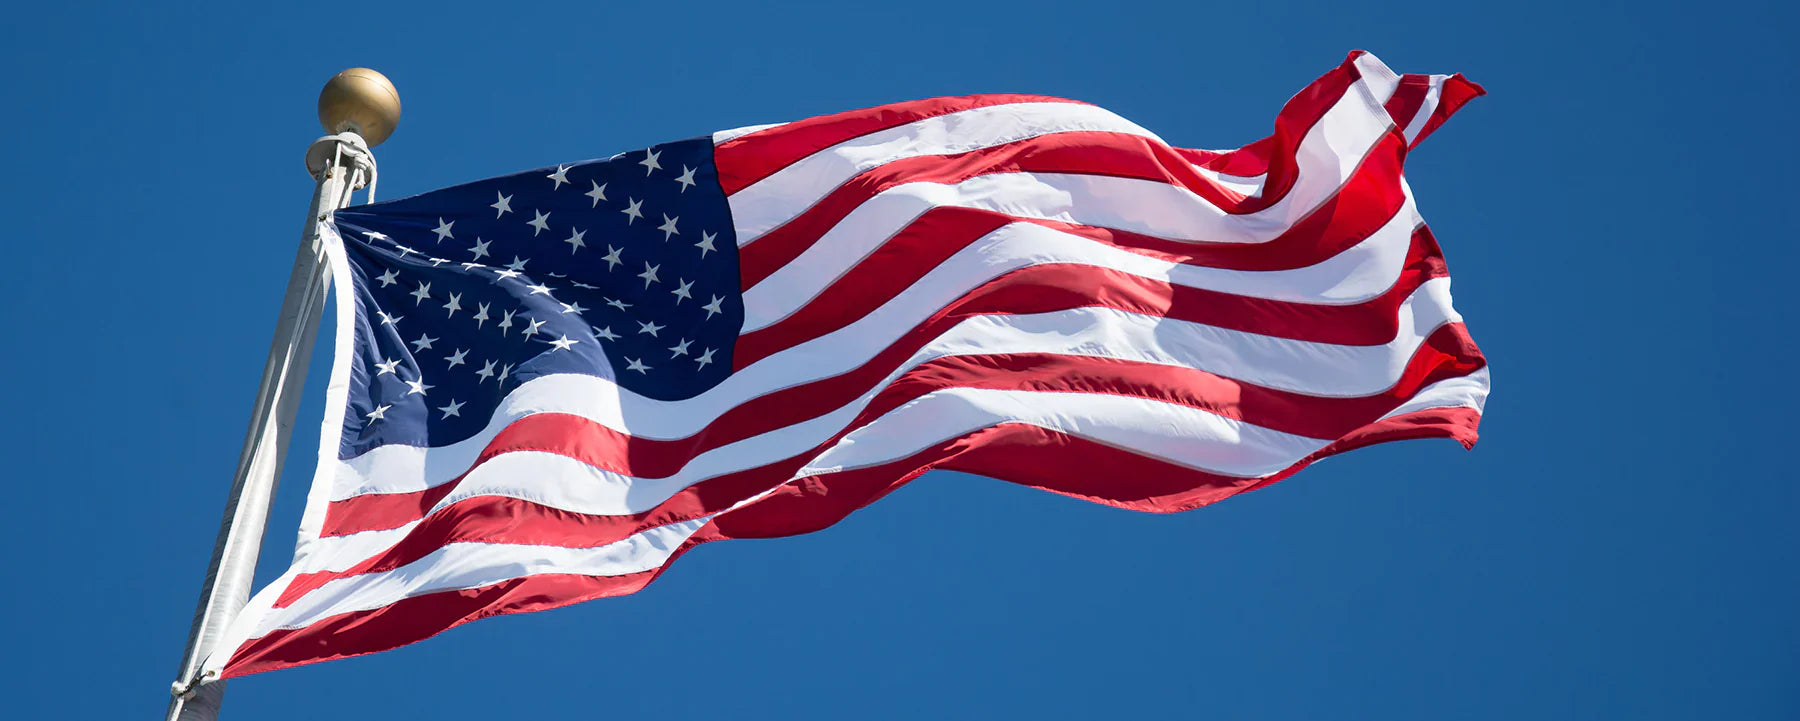 American Flagpole Best Practices & Guidance